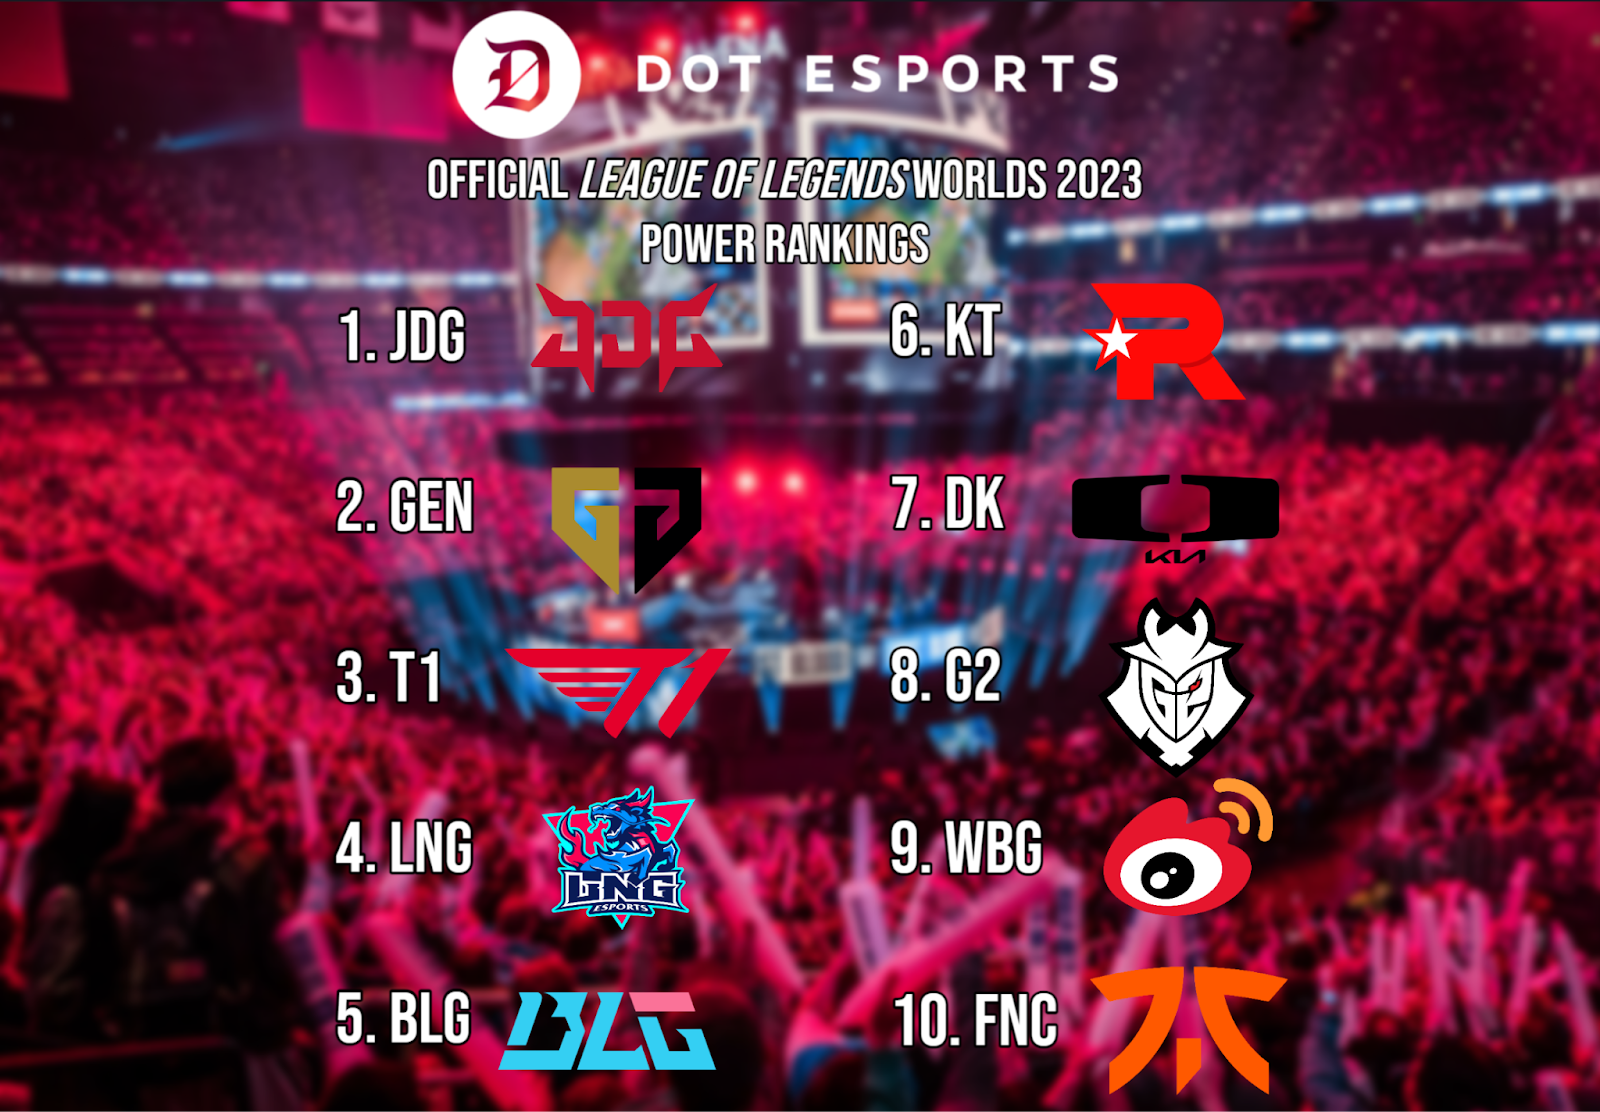 The statistically strongest teams going into League of Legends